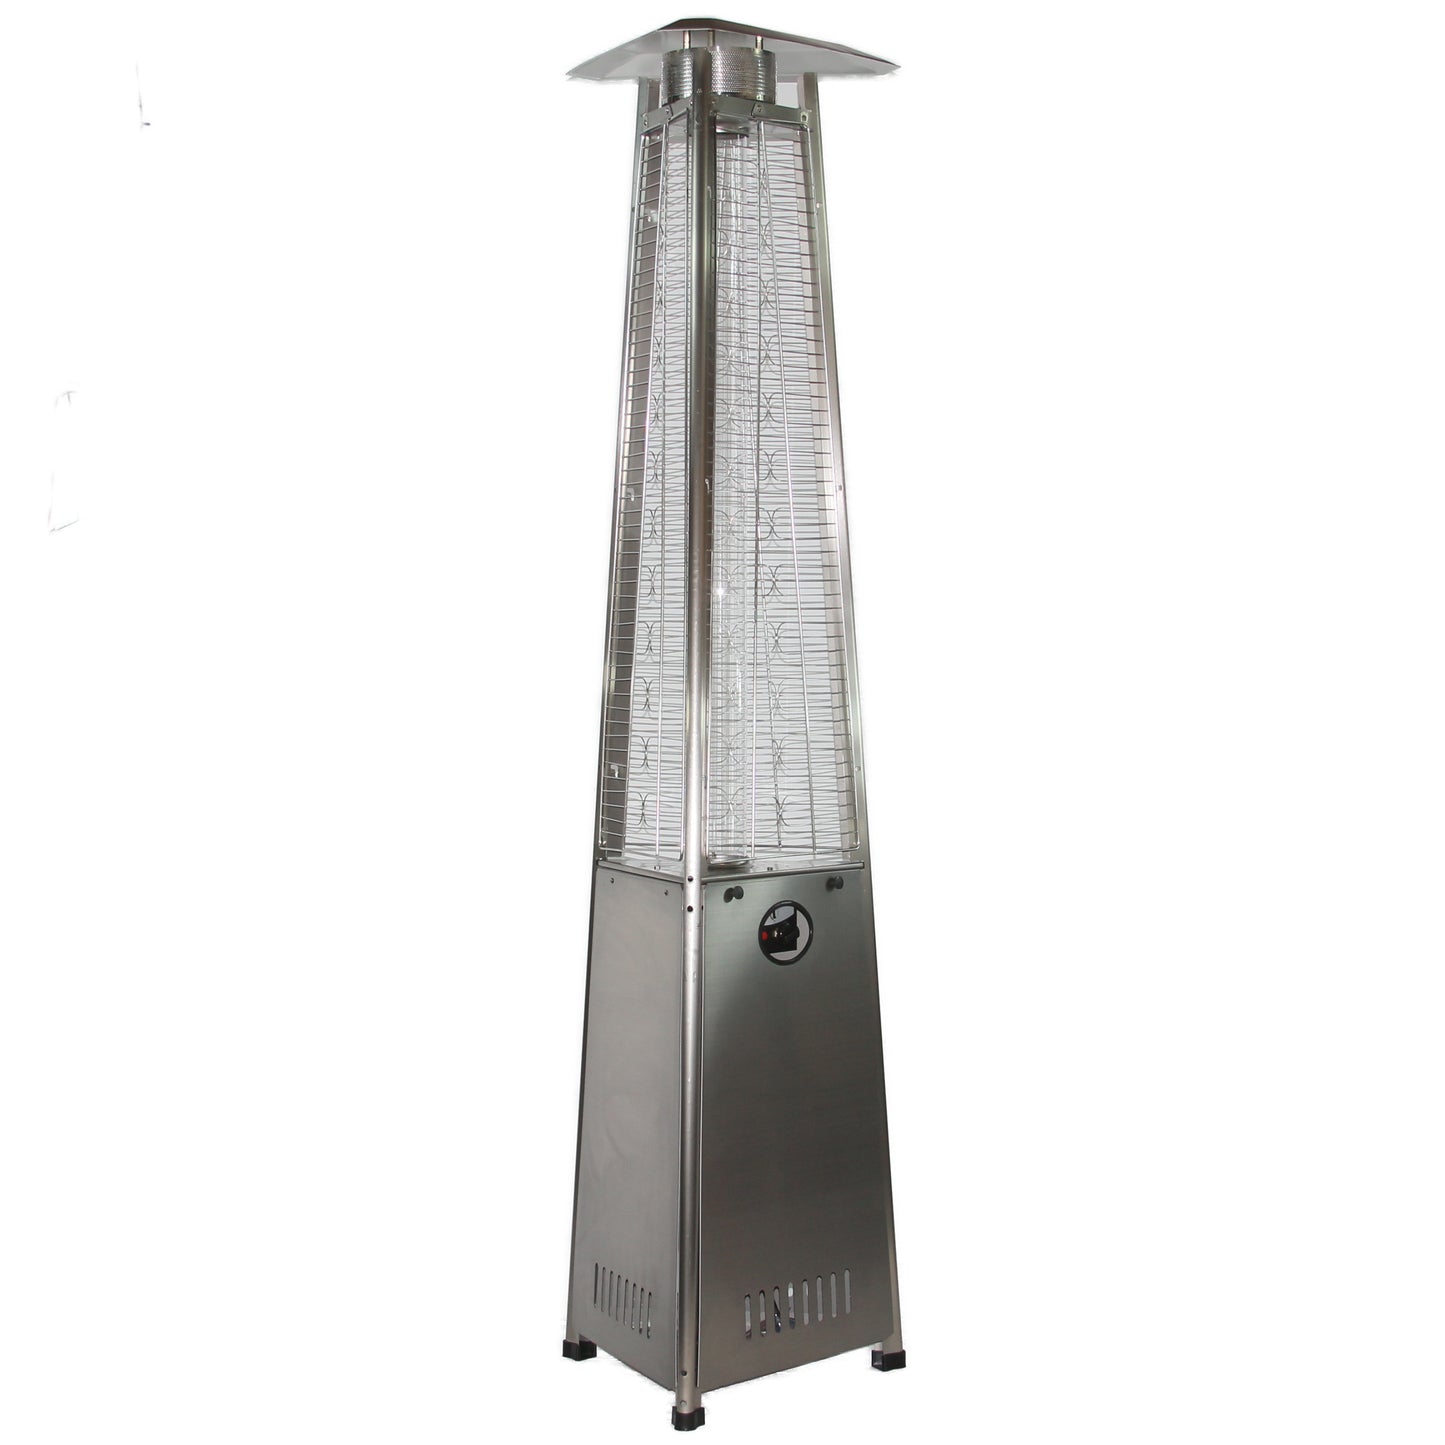 93" Pyramid Flame Propane Patio Heater - Stainless Steel Finish